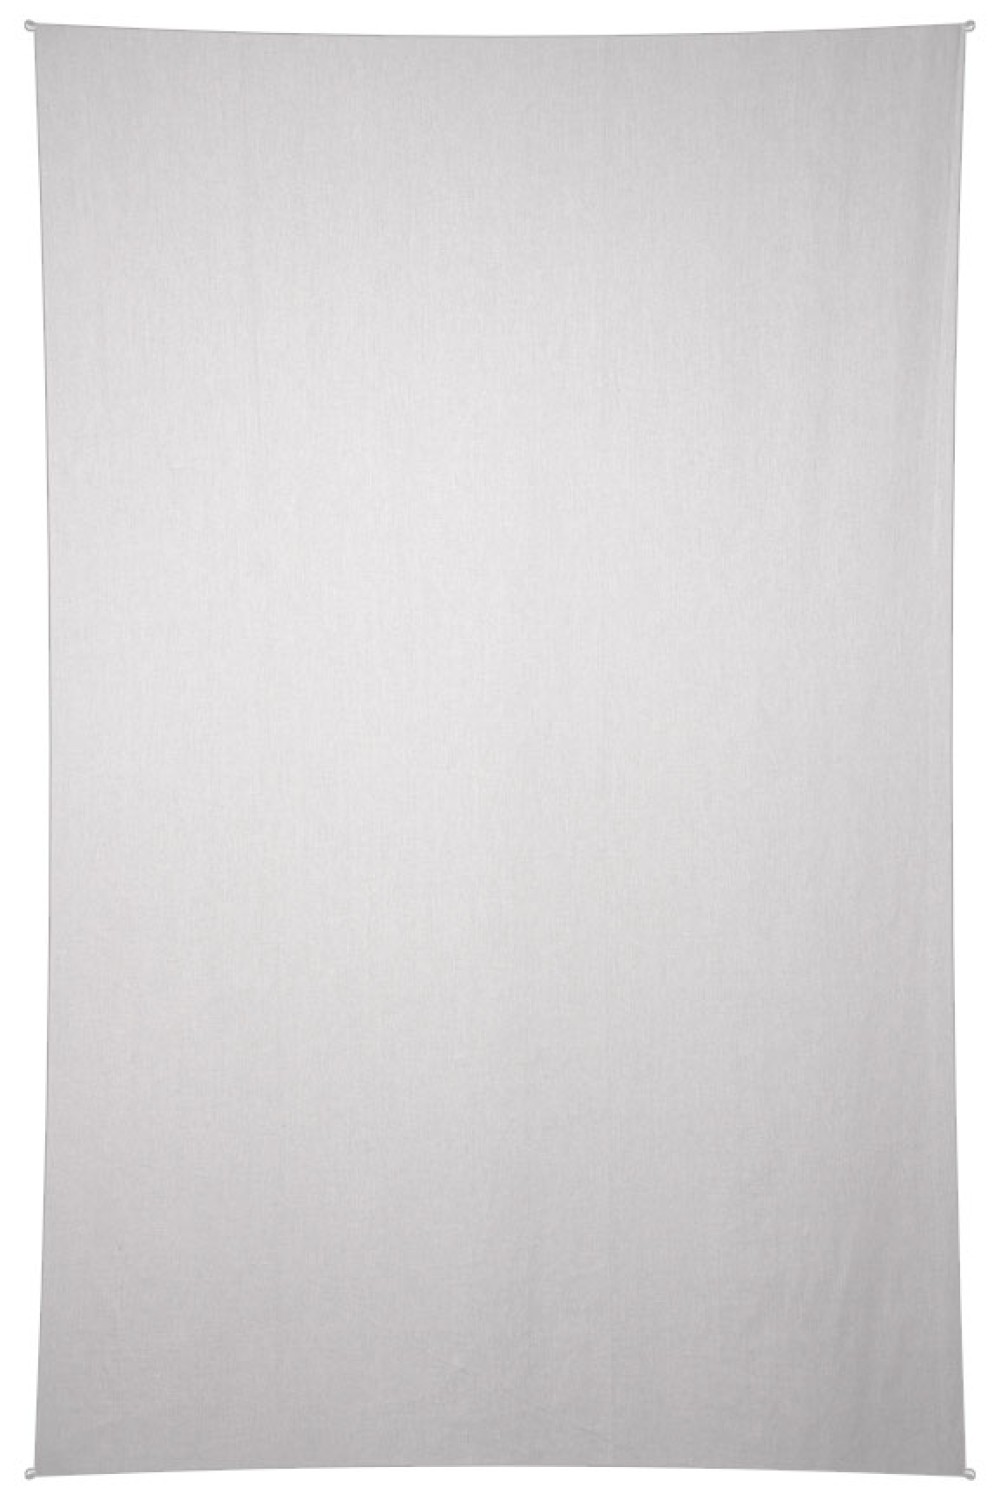 Blank White Tapestry 30x45 100% Cotton 